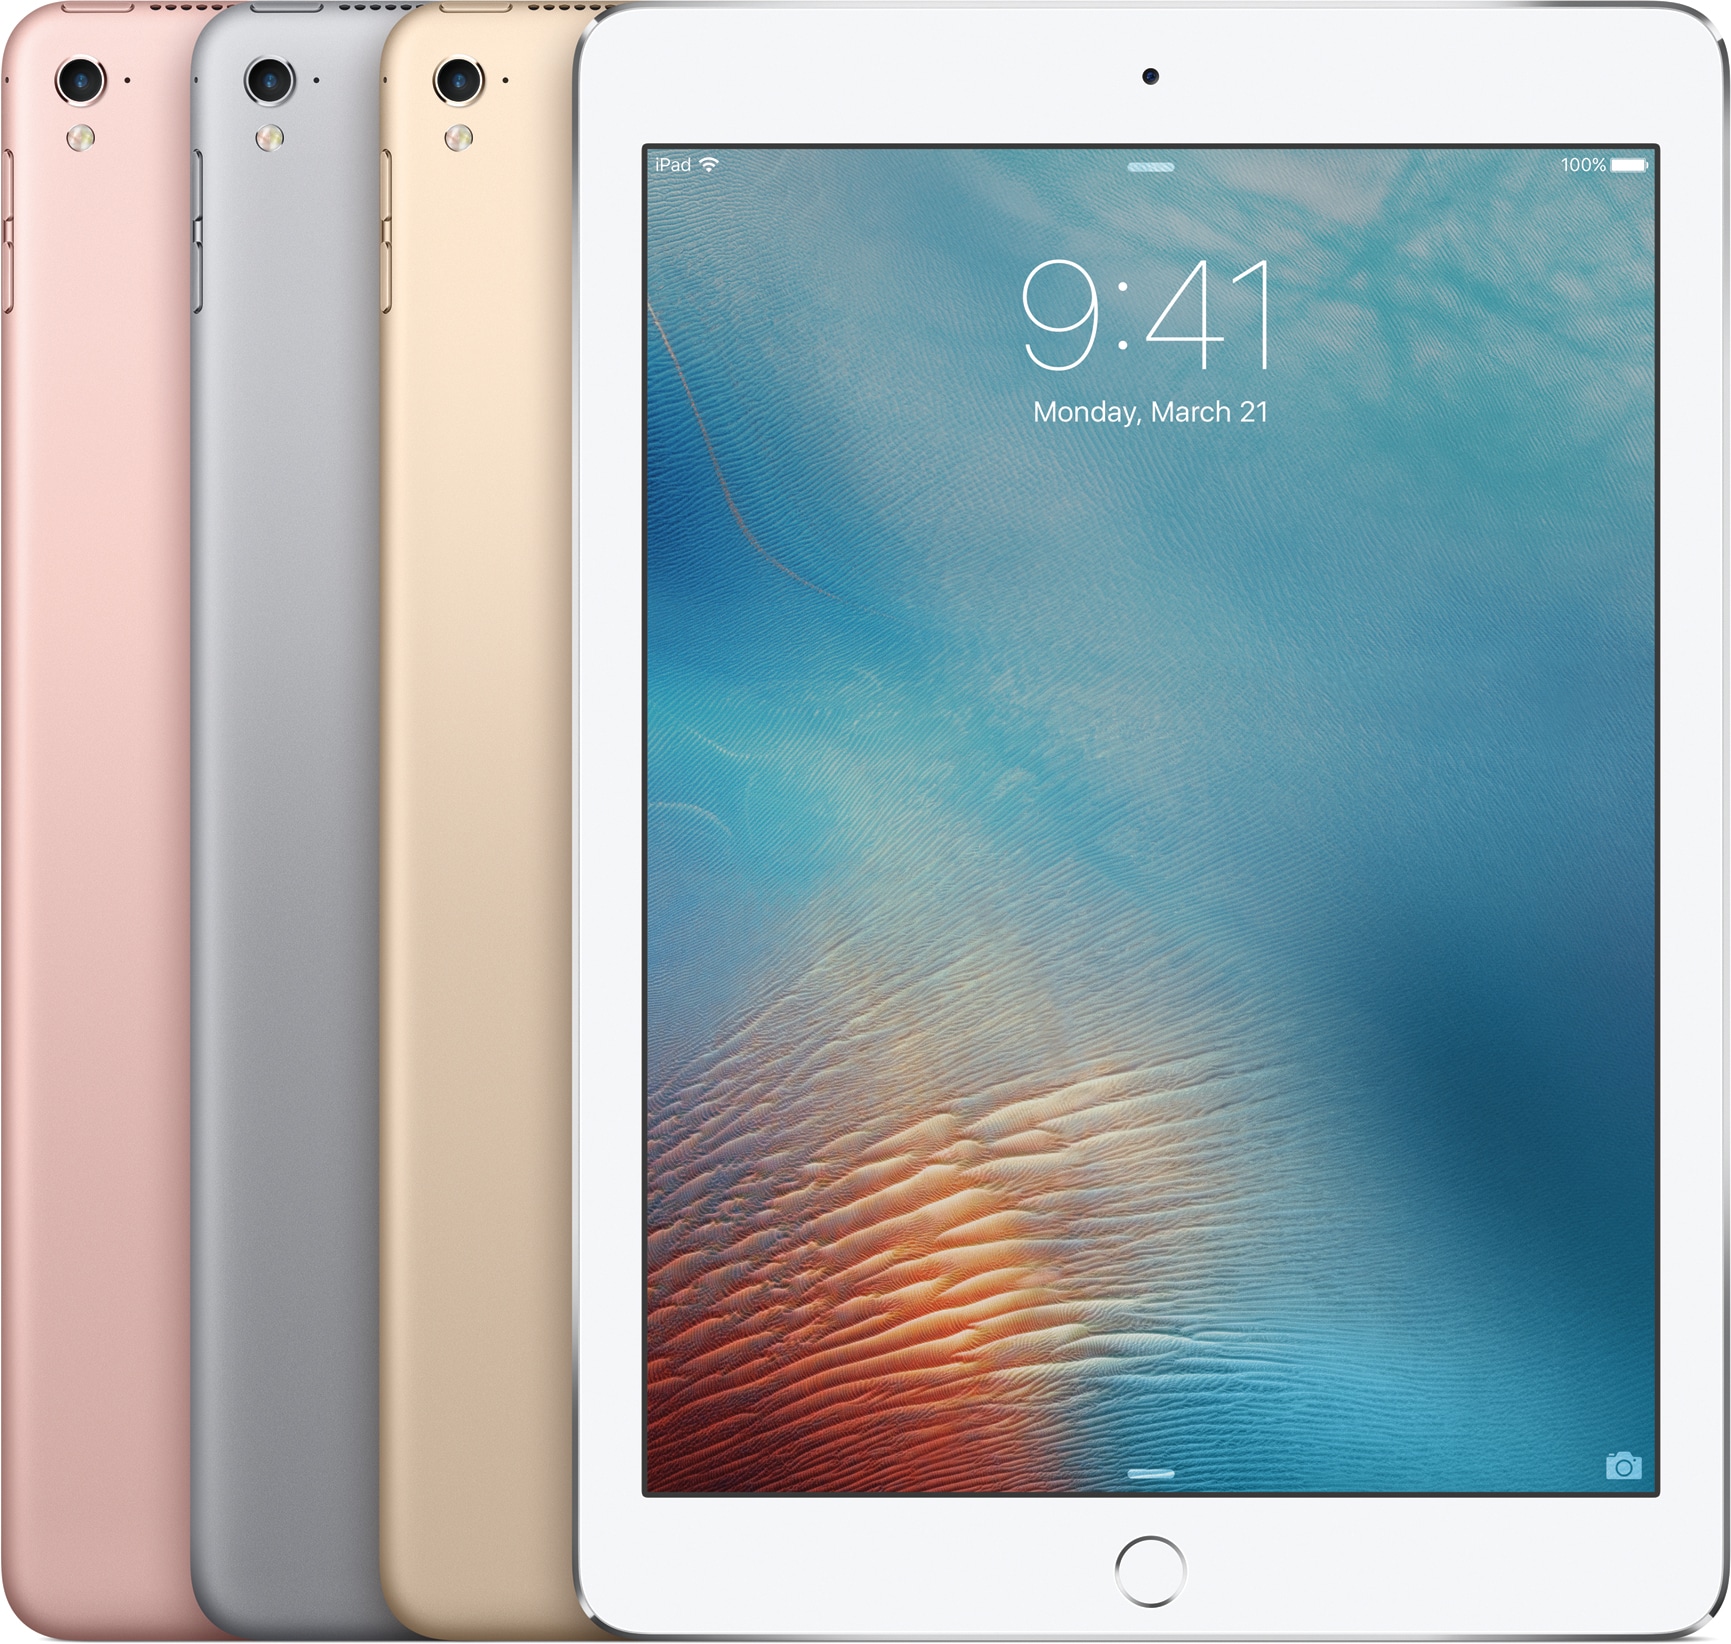 Family of 9.7-inch iPad Pro with four colors side by side